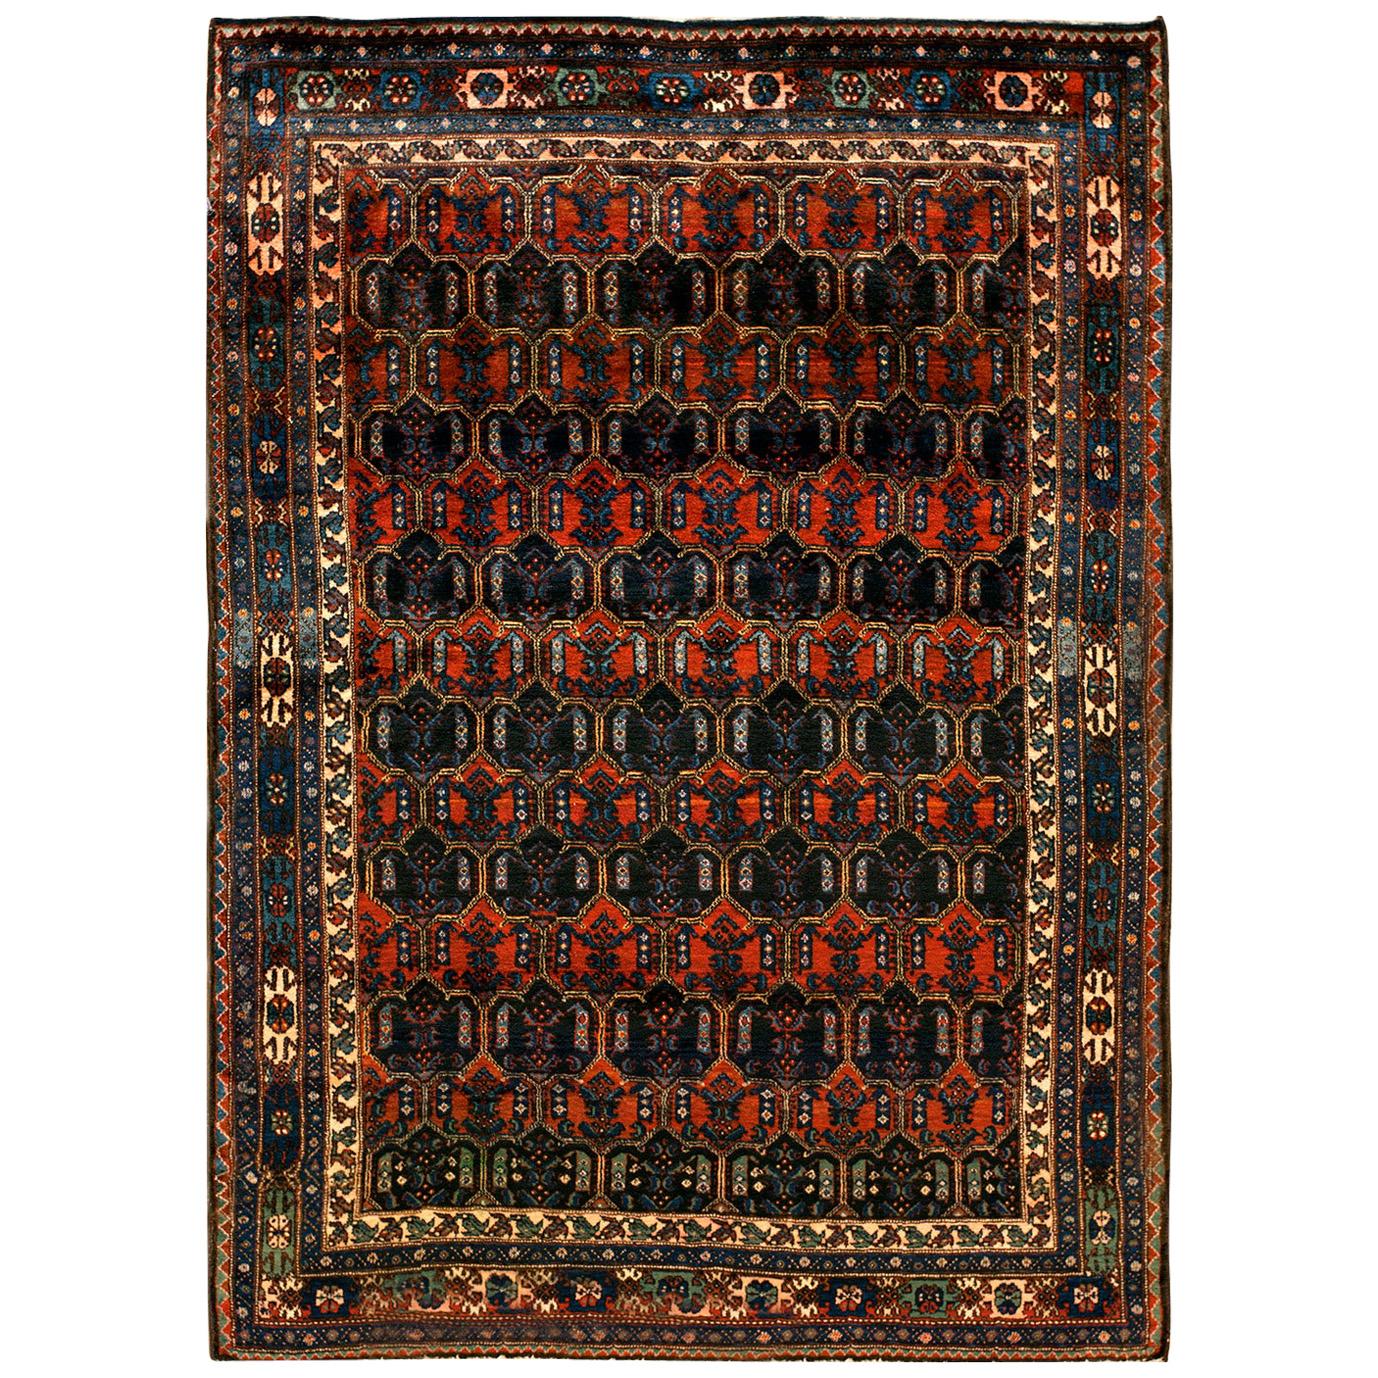 Early 20th Century Persian Malayer Carpet ( 4'11" x 6'10" - 150 x 208 ) For Sale